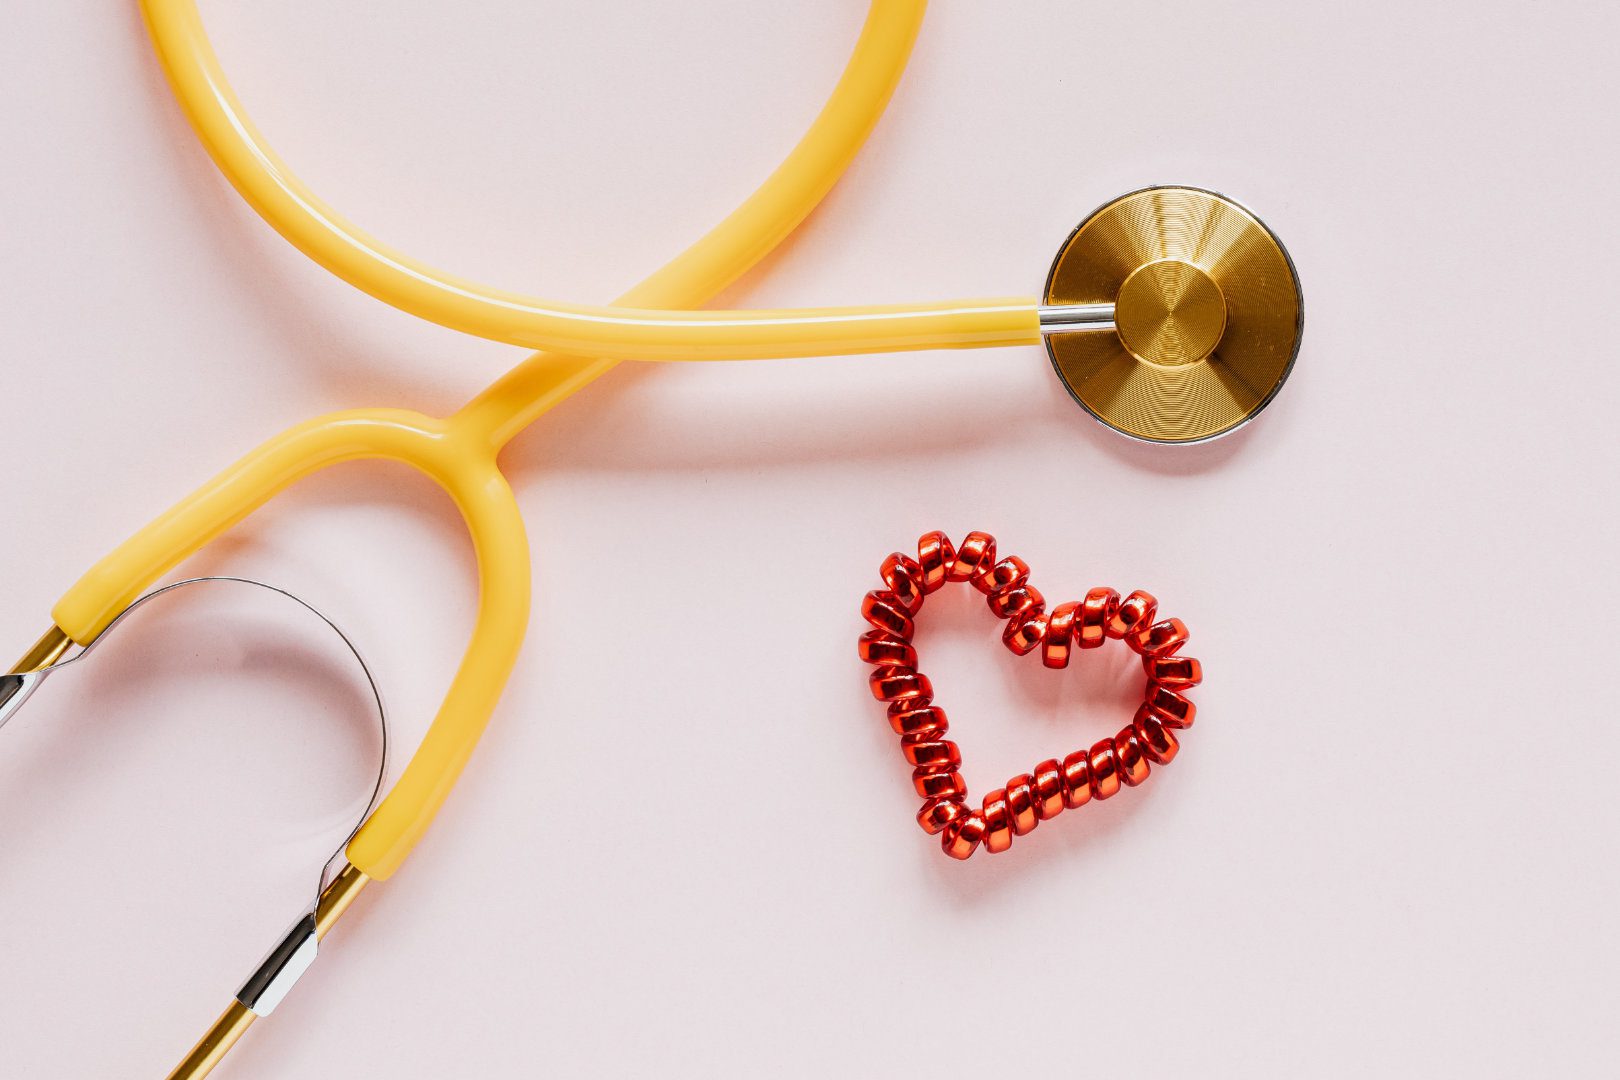 Yellow Stethoscope with a little heart made out of ribbons next to it